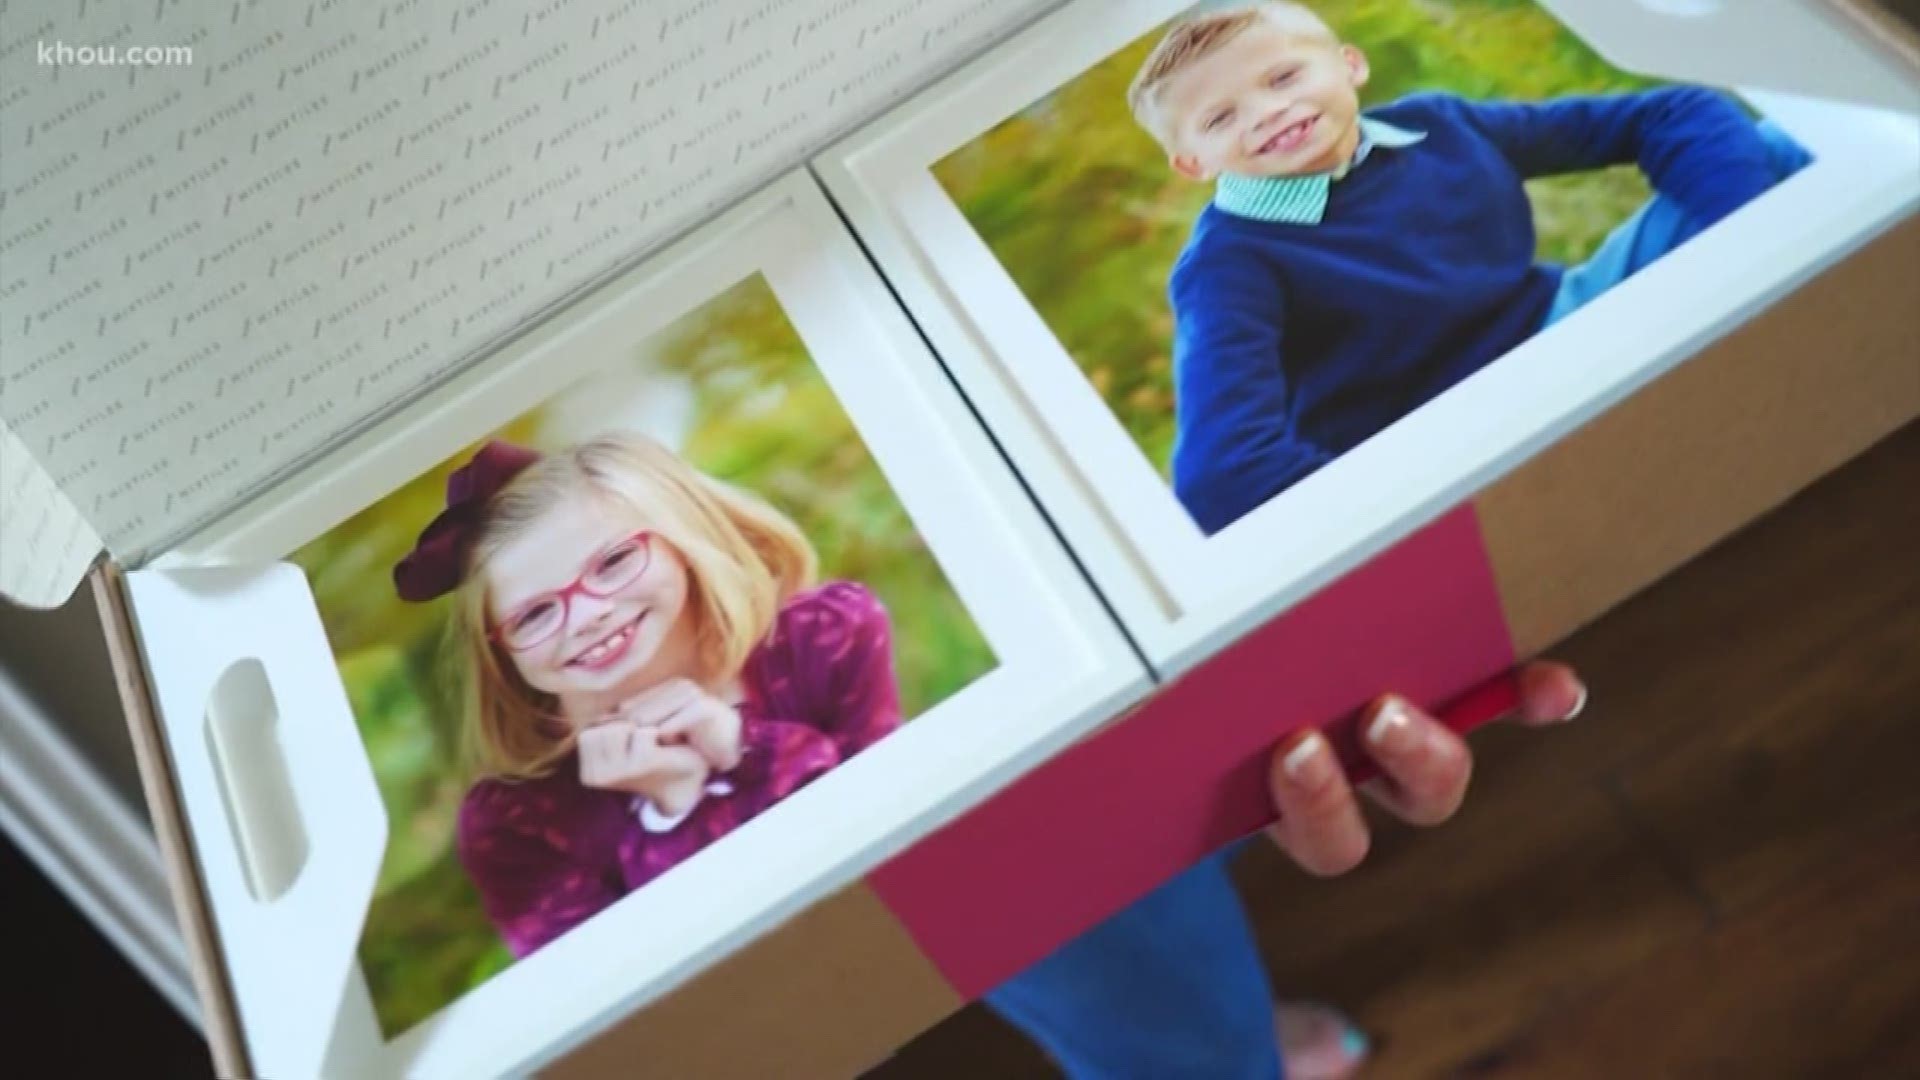 We're testing out the company that says their photo print tiles won't damage your walls.